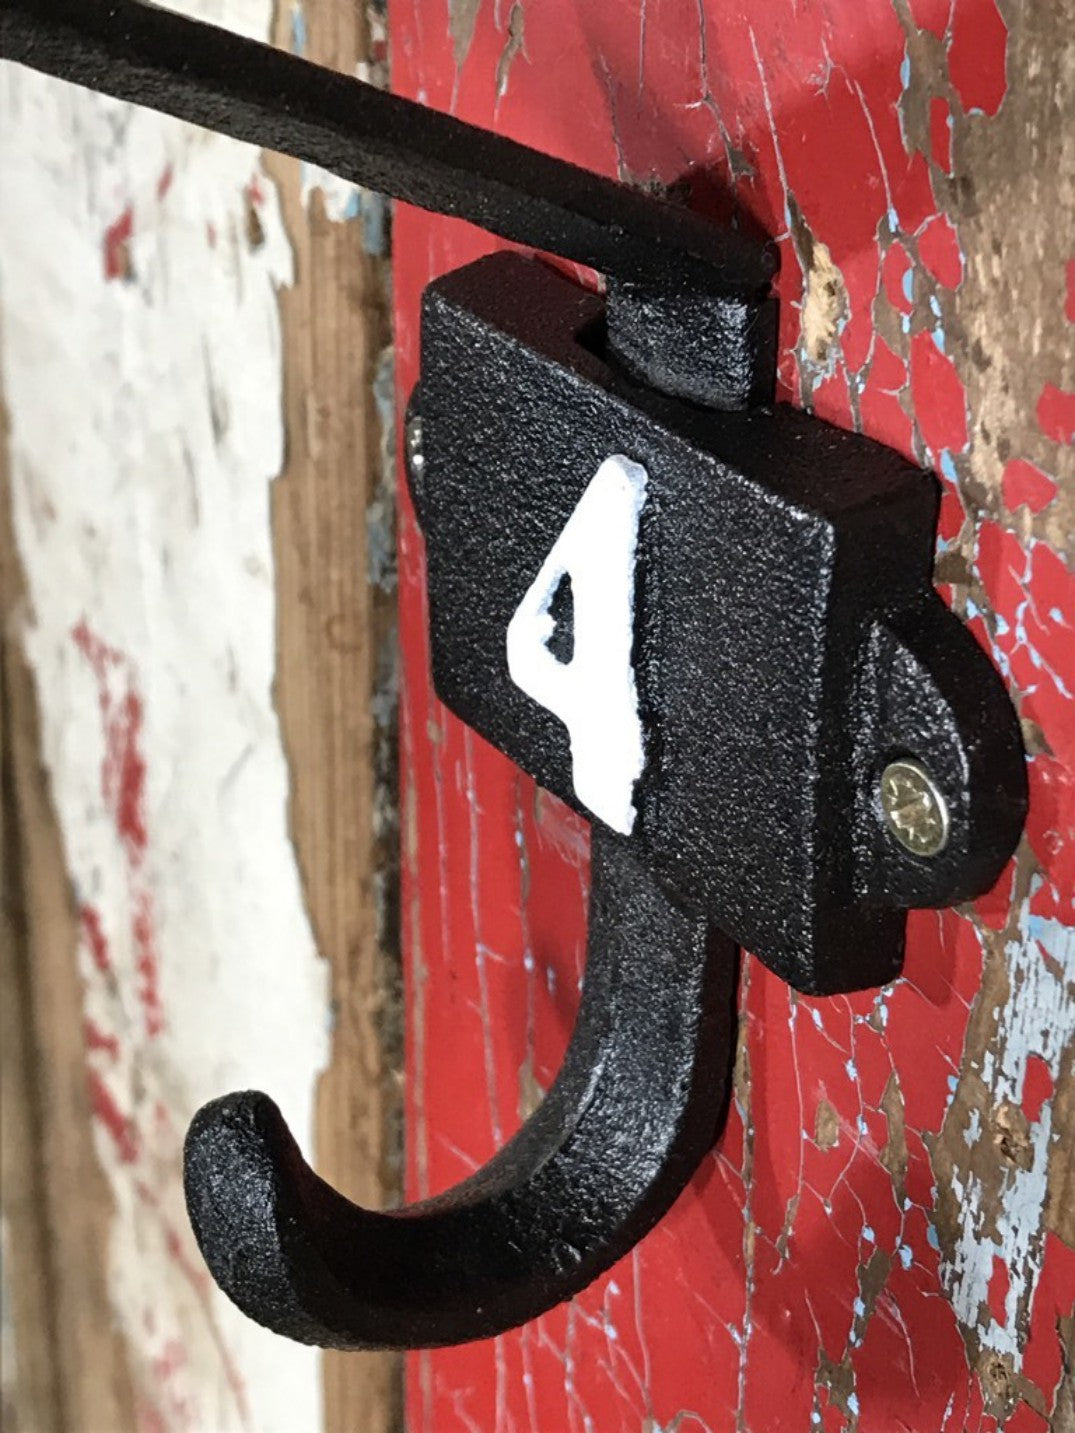 Heavy Solid Cast Iron Black Double Wall Coat Hook with Number 4 in White